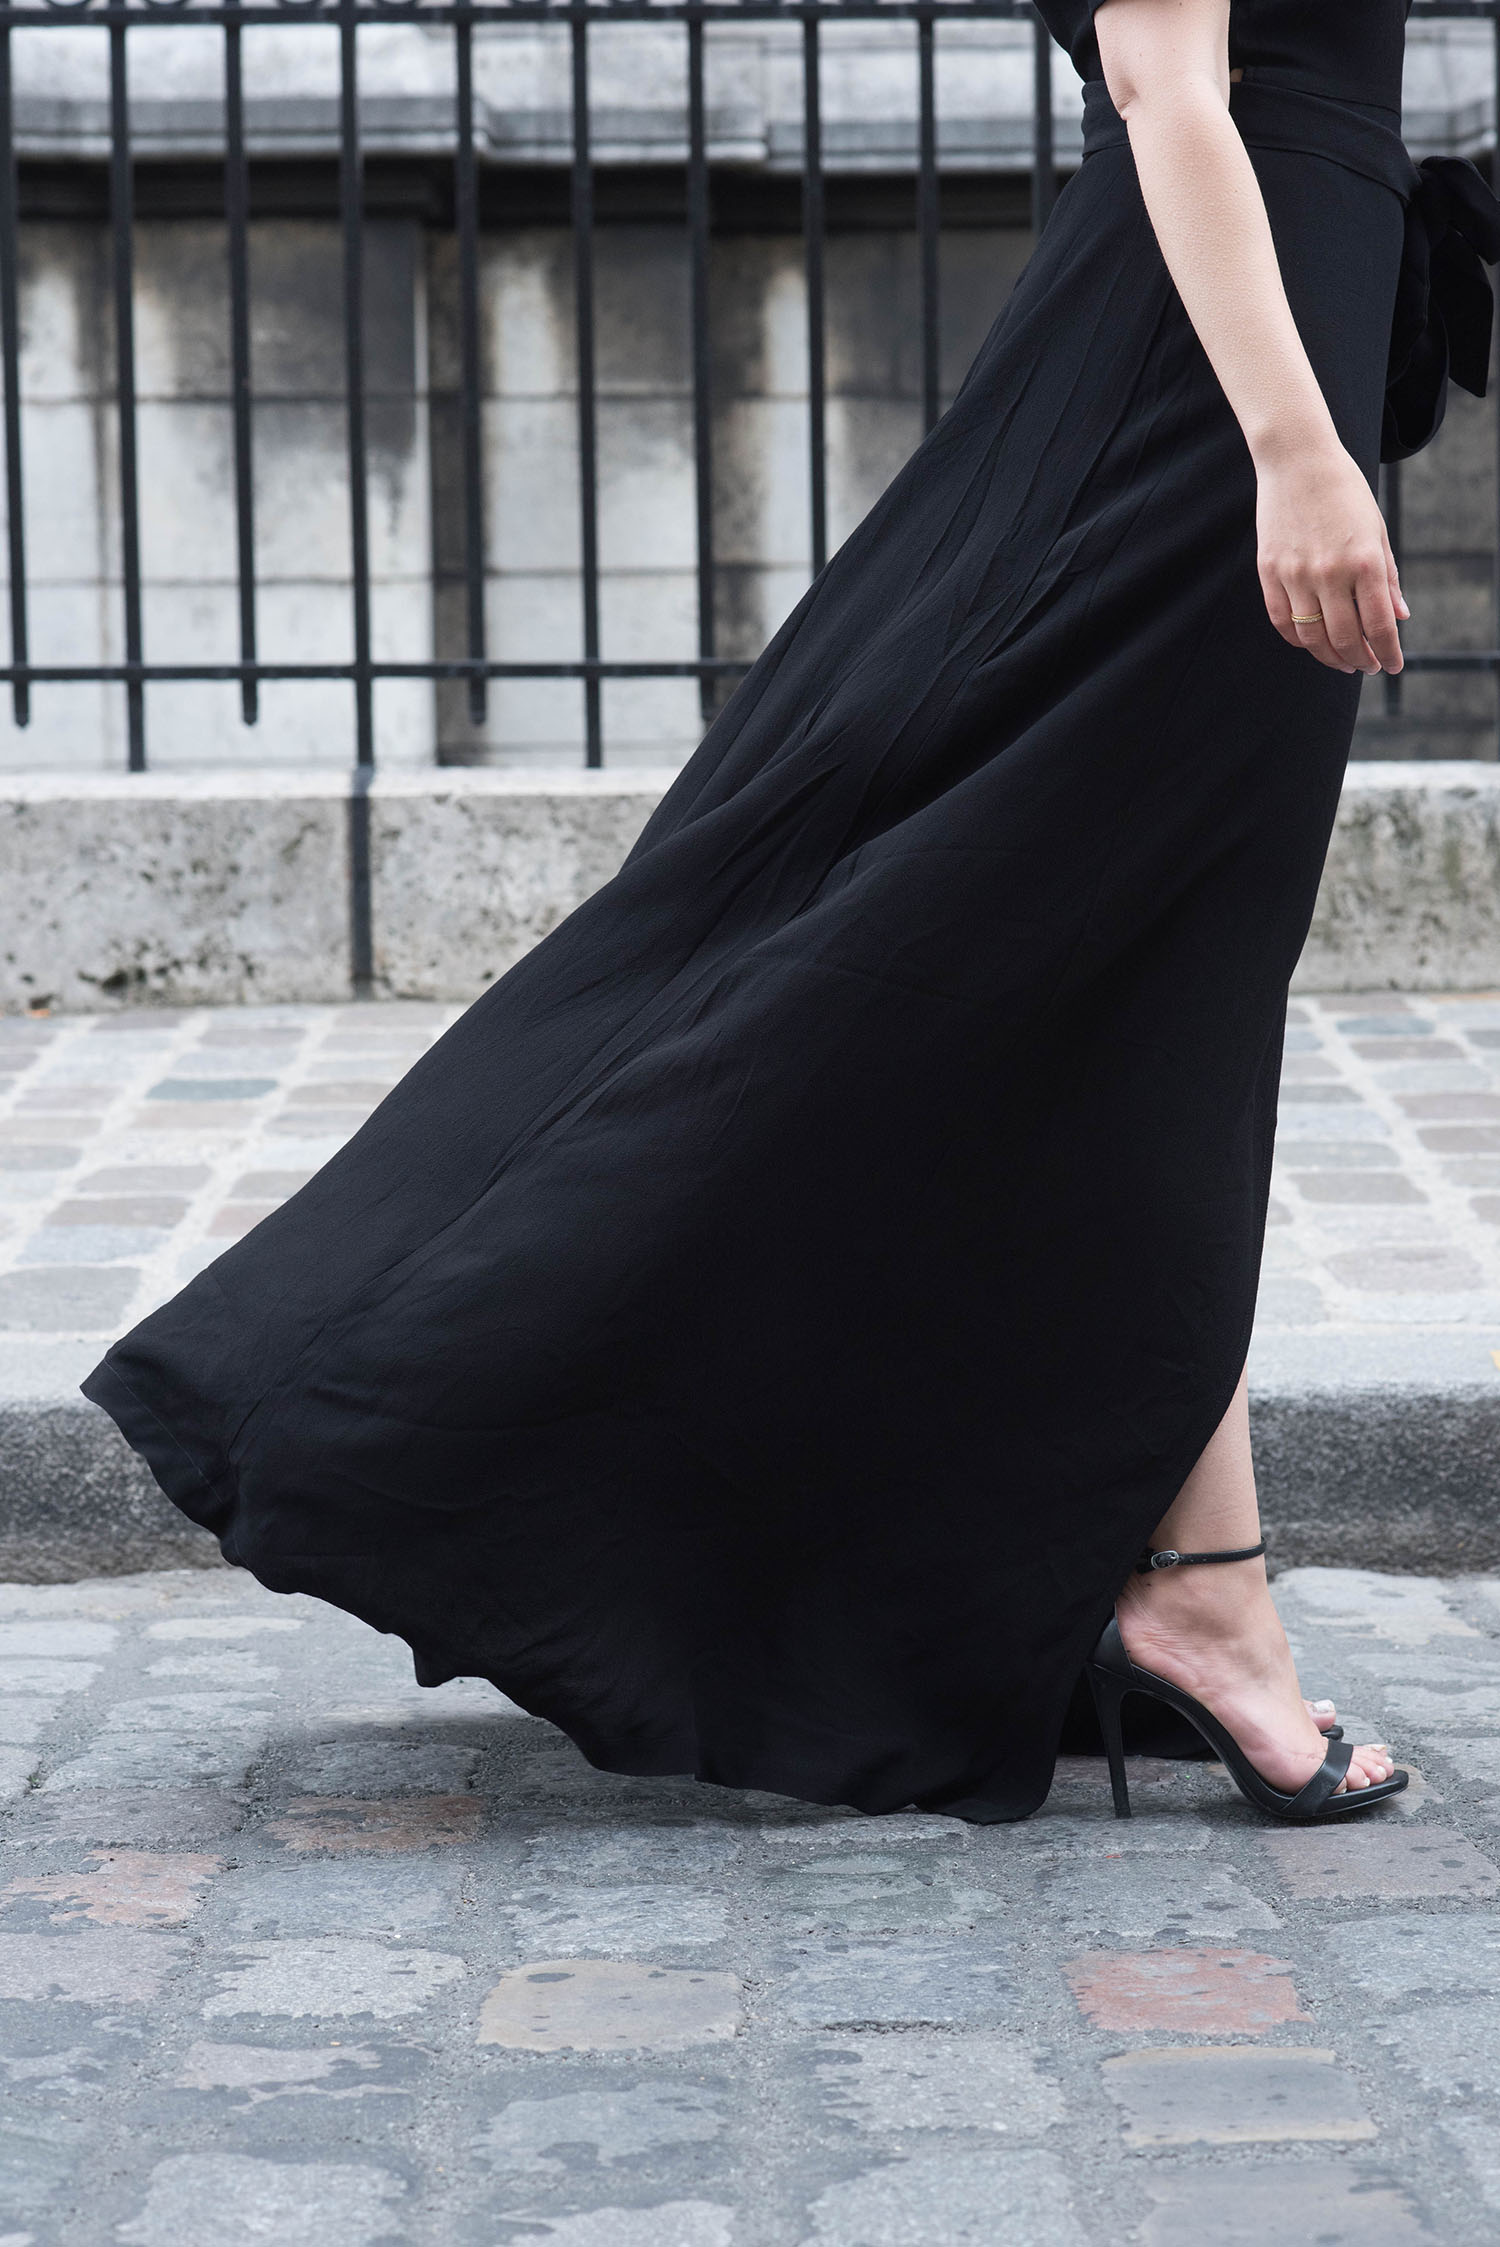 Outfit details on fashion blogger Cee Fardoe of Coco & Vera, including and Ivy & Oak black maxi dress and Steve Madden Stecy sandals